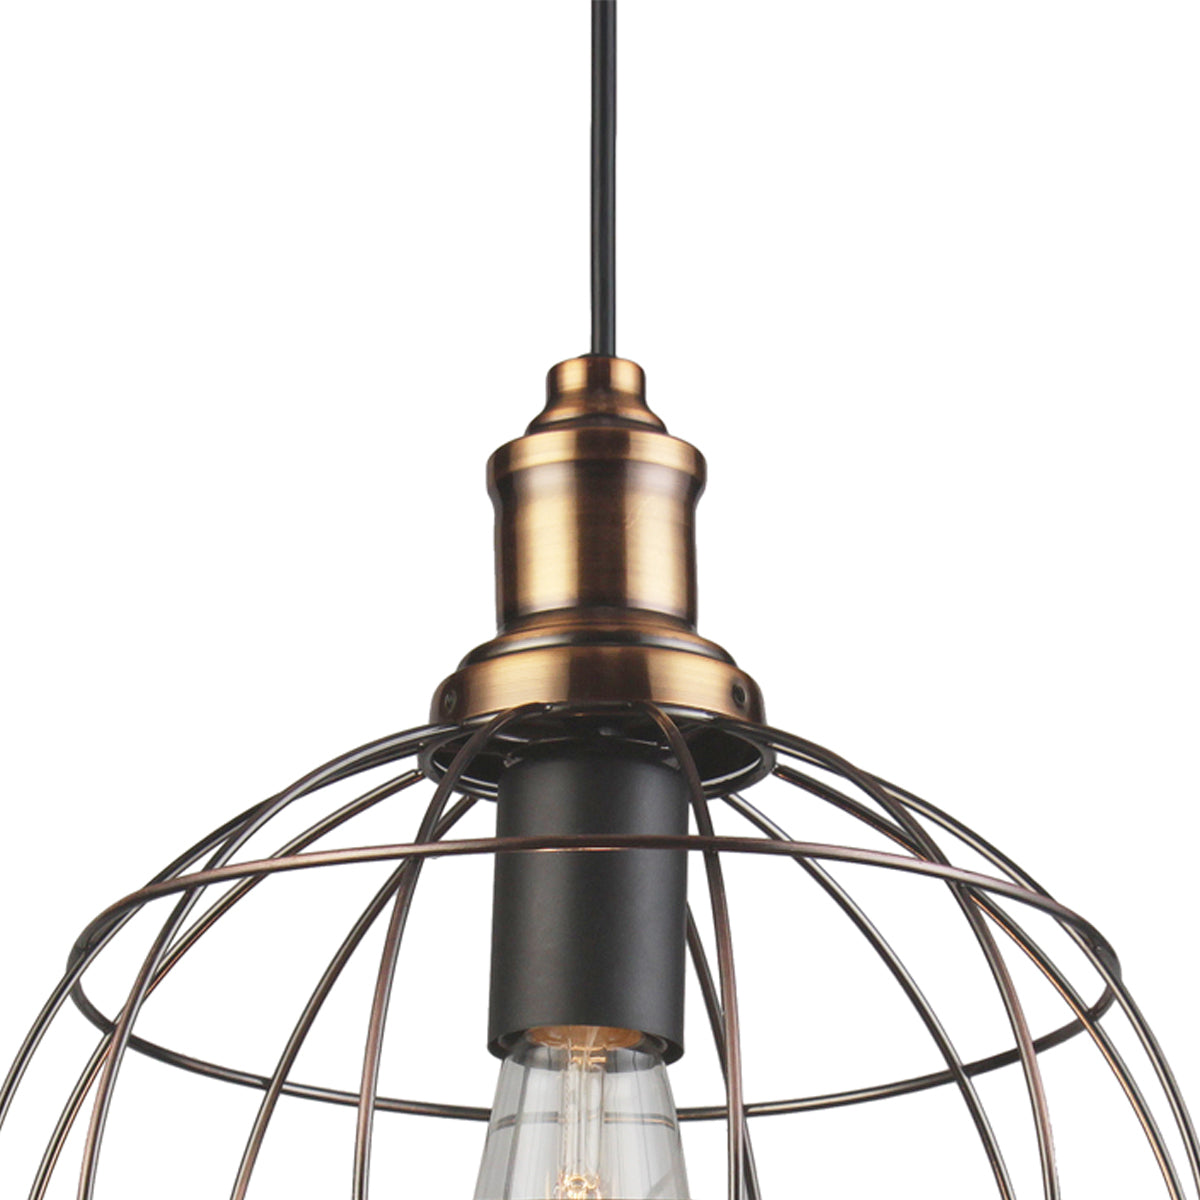 Our Edward pendant light features a round caged shade finished in brass. A modern take on the vintage cage style that looks fantastic when teamed with a filament style lamp. Comes as a complete light fitting and the height can be adjusted at the time of fitting.